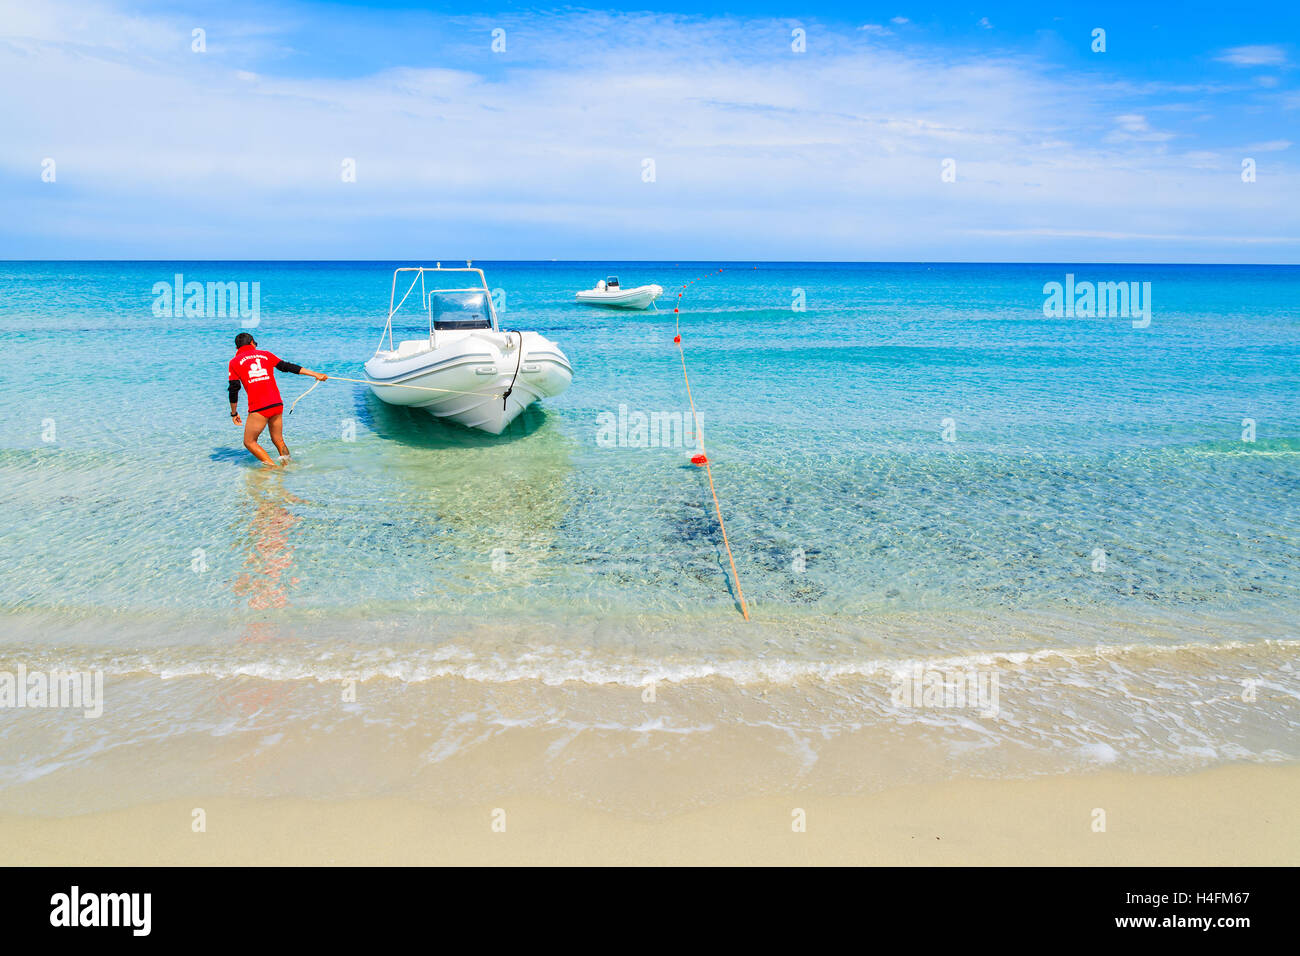 PORTO GIUNCO BEACH, SARDINIA - MAY 28, 2014: lifeguard pulling a rescue boat to shore on Villasimius beach, Sardinia island, Italy. This area is very popular destination for water sport activities. Stock Photo